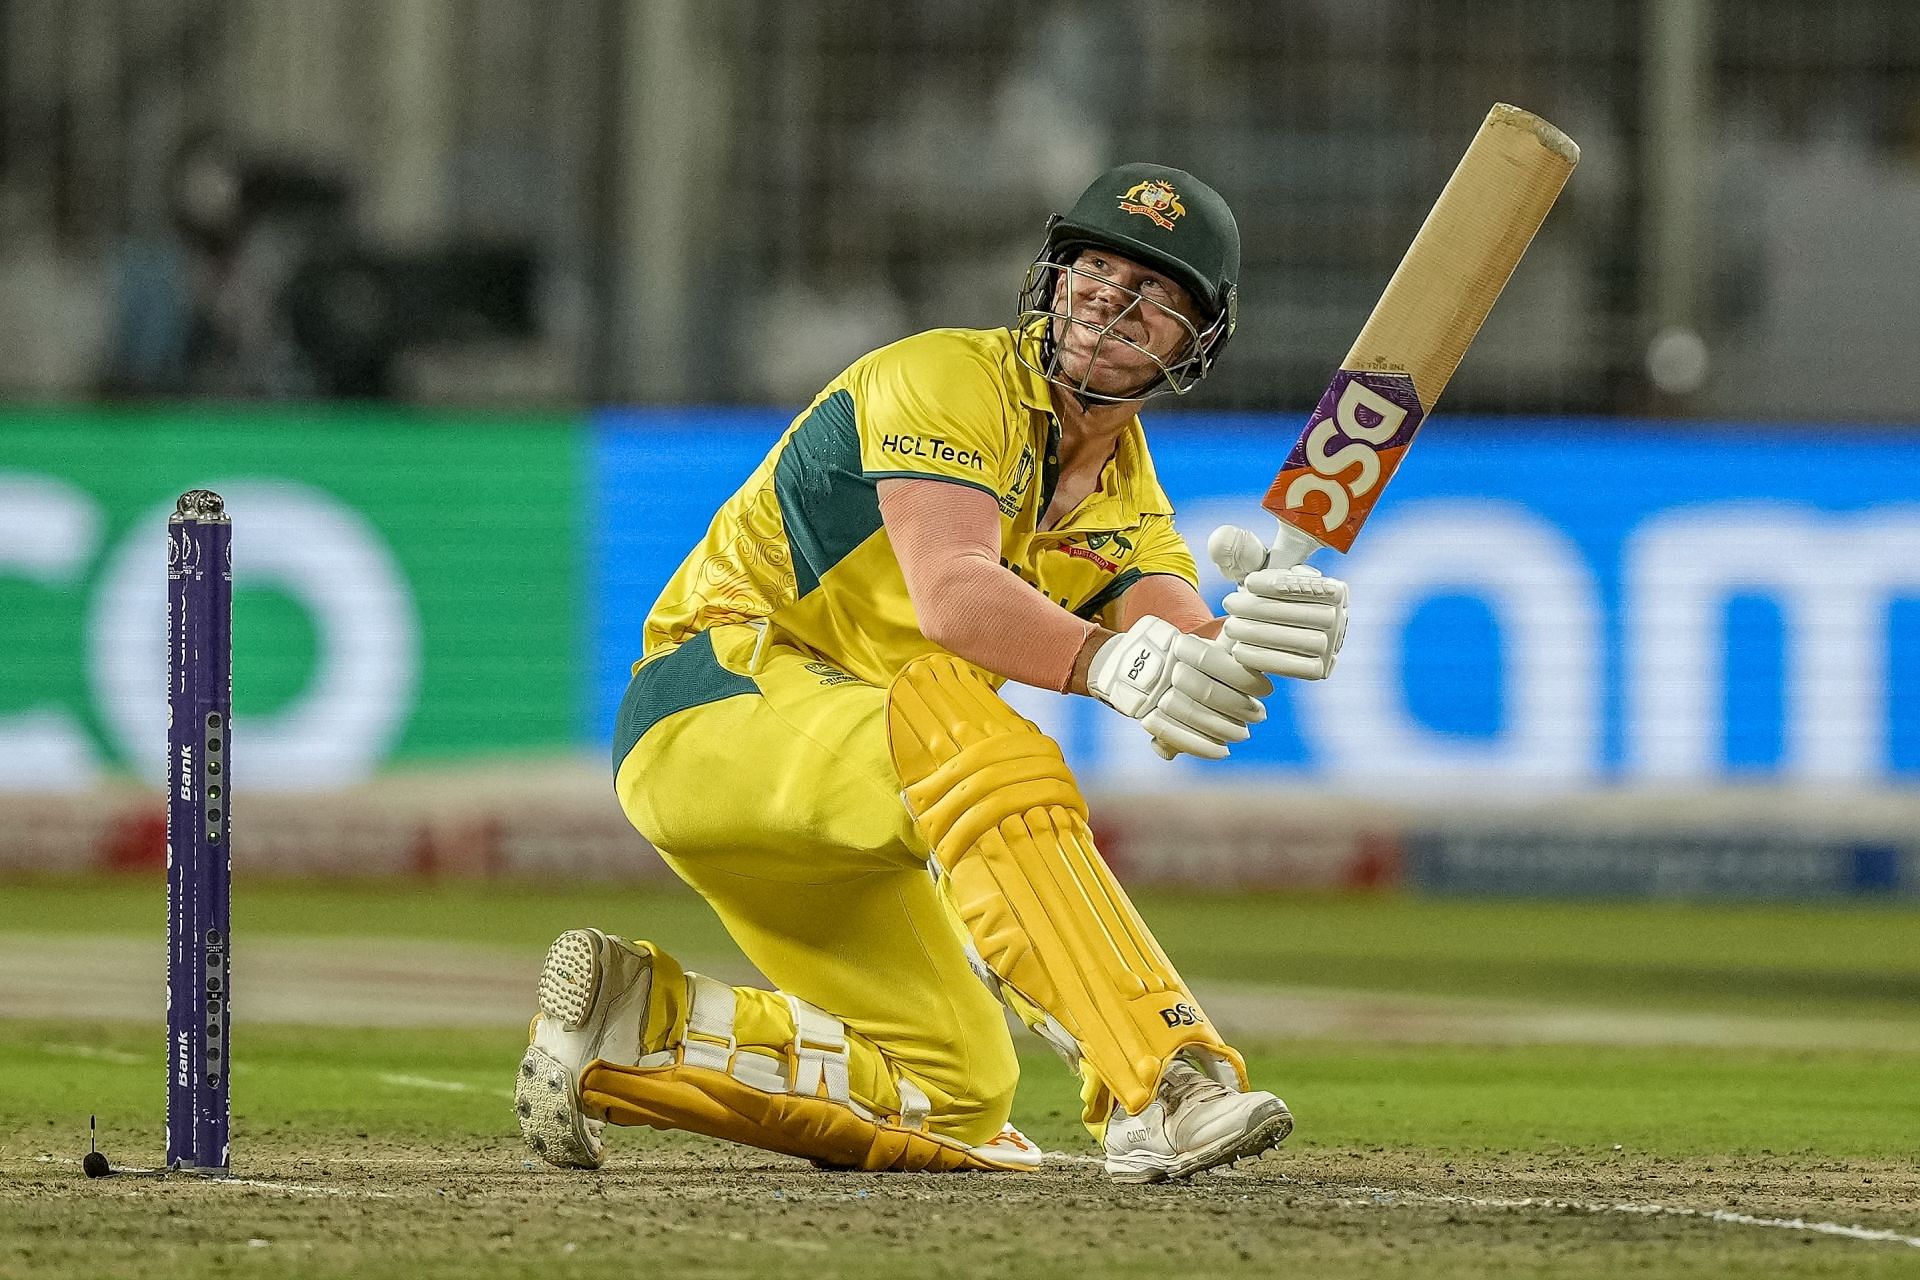 David Warner playing a cheeky shot vs South Africa [Getty Images]